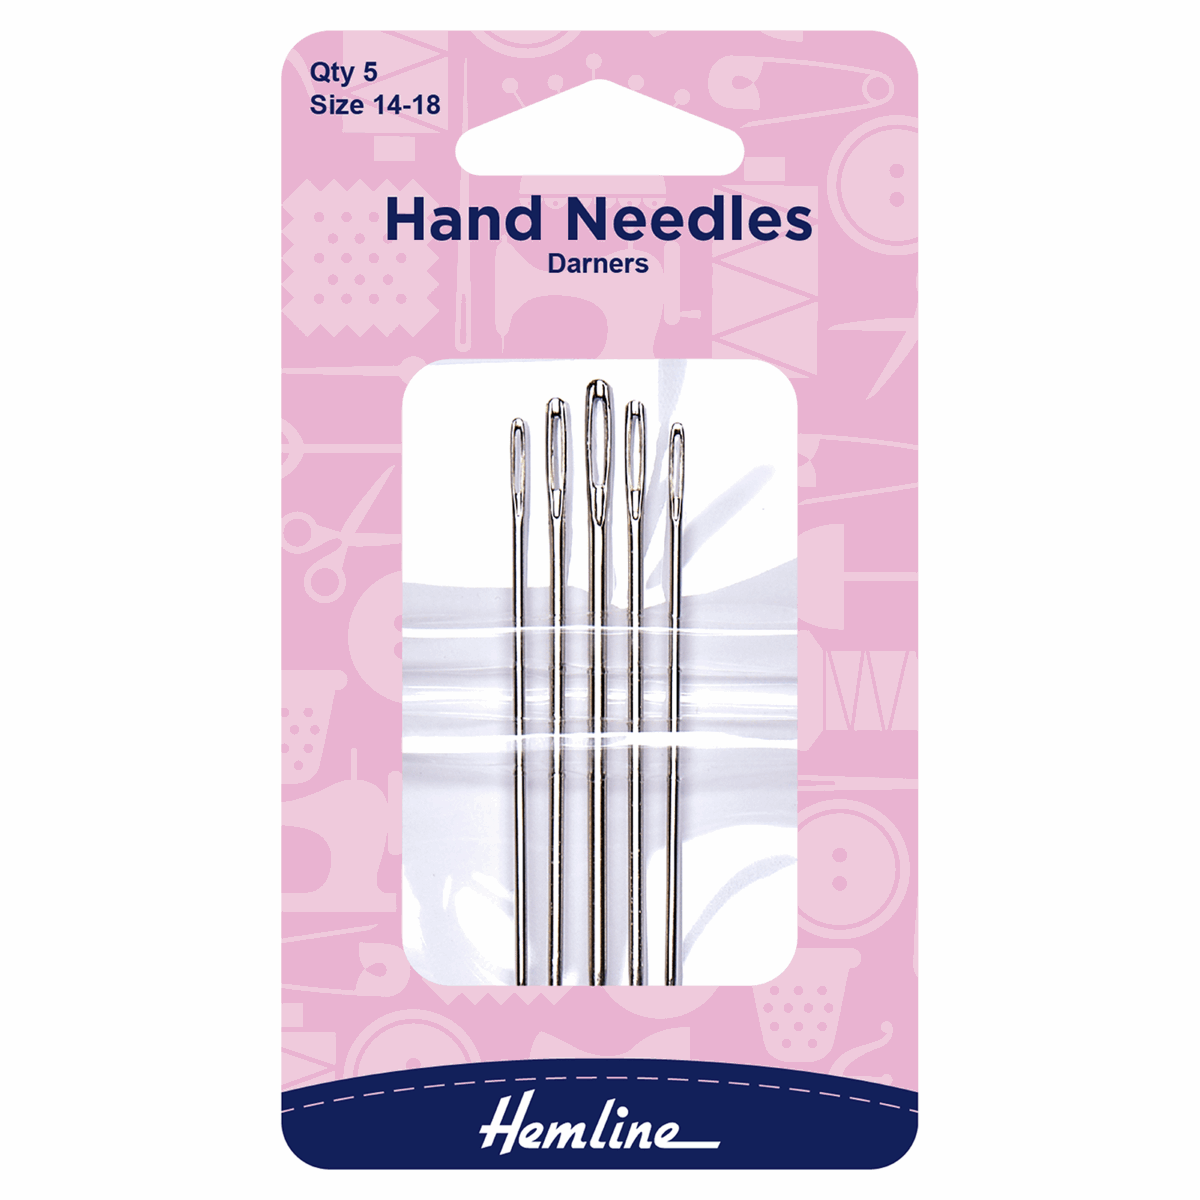 Hand Sewing Needles: Darner: Size 14-18